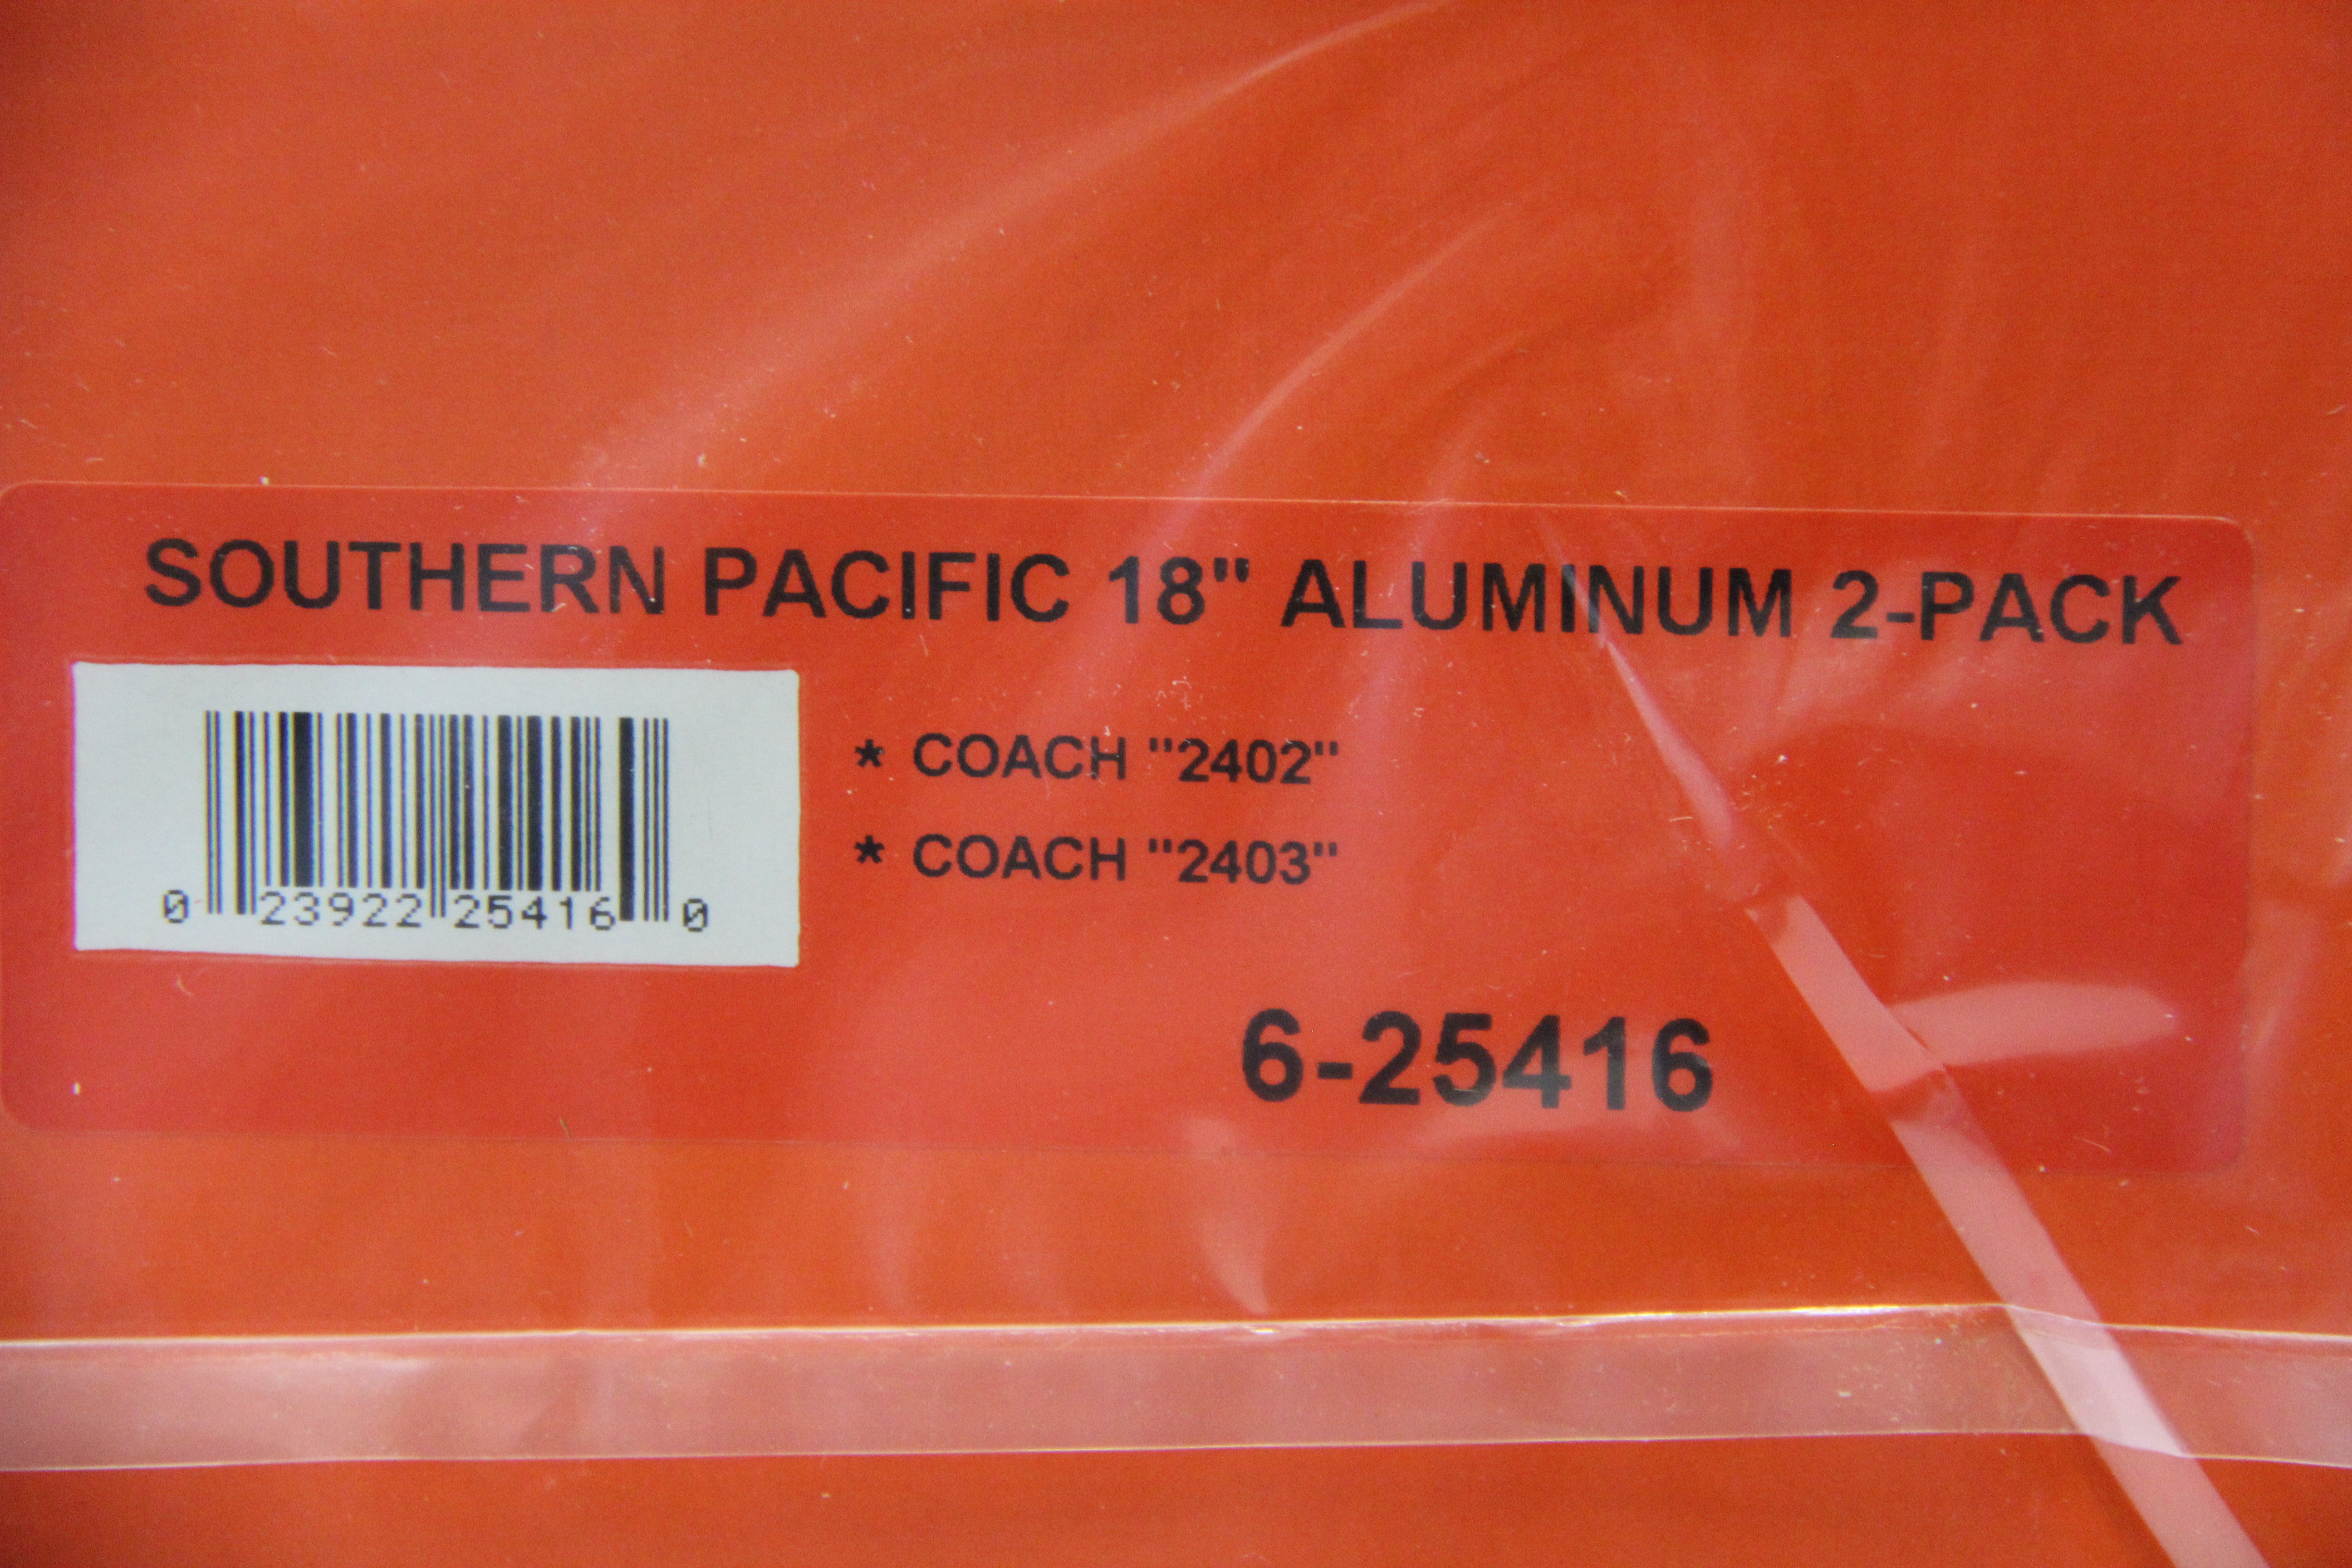 Lionel 6-25416 Southern Pacific 18" Aluminum 2-Pack-Second hand-M3865